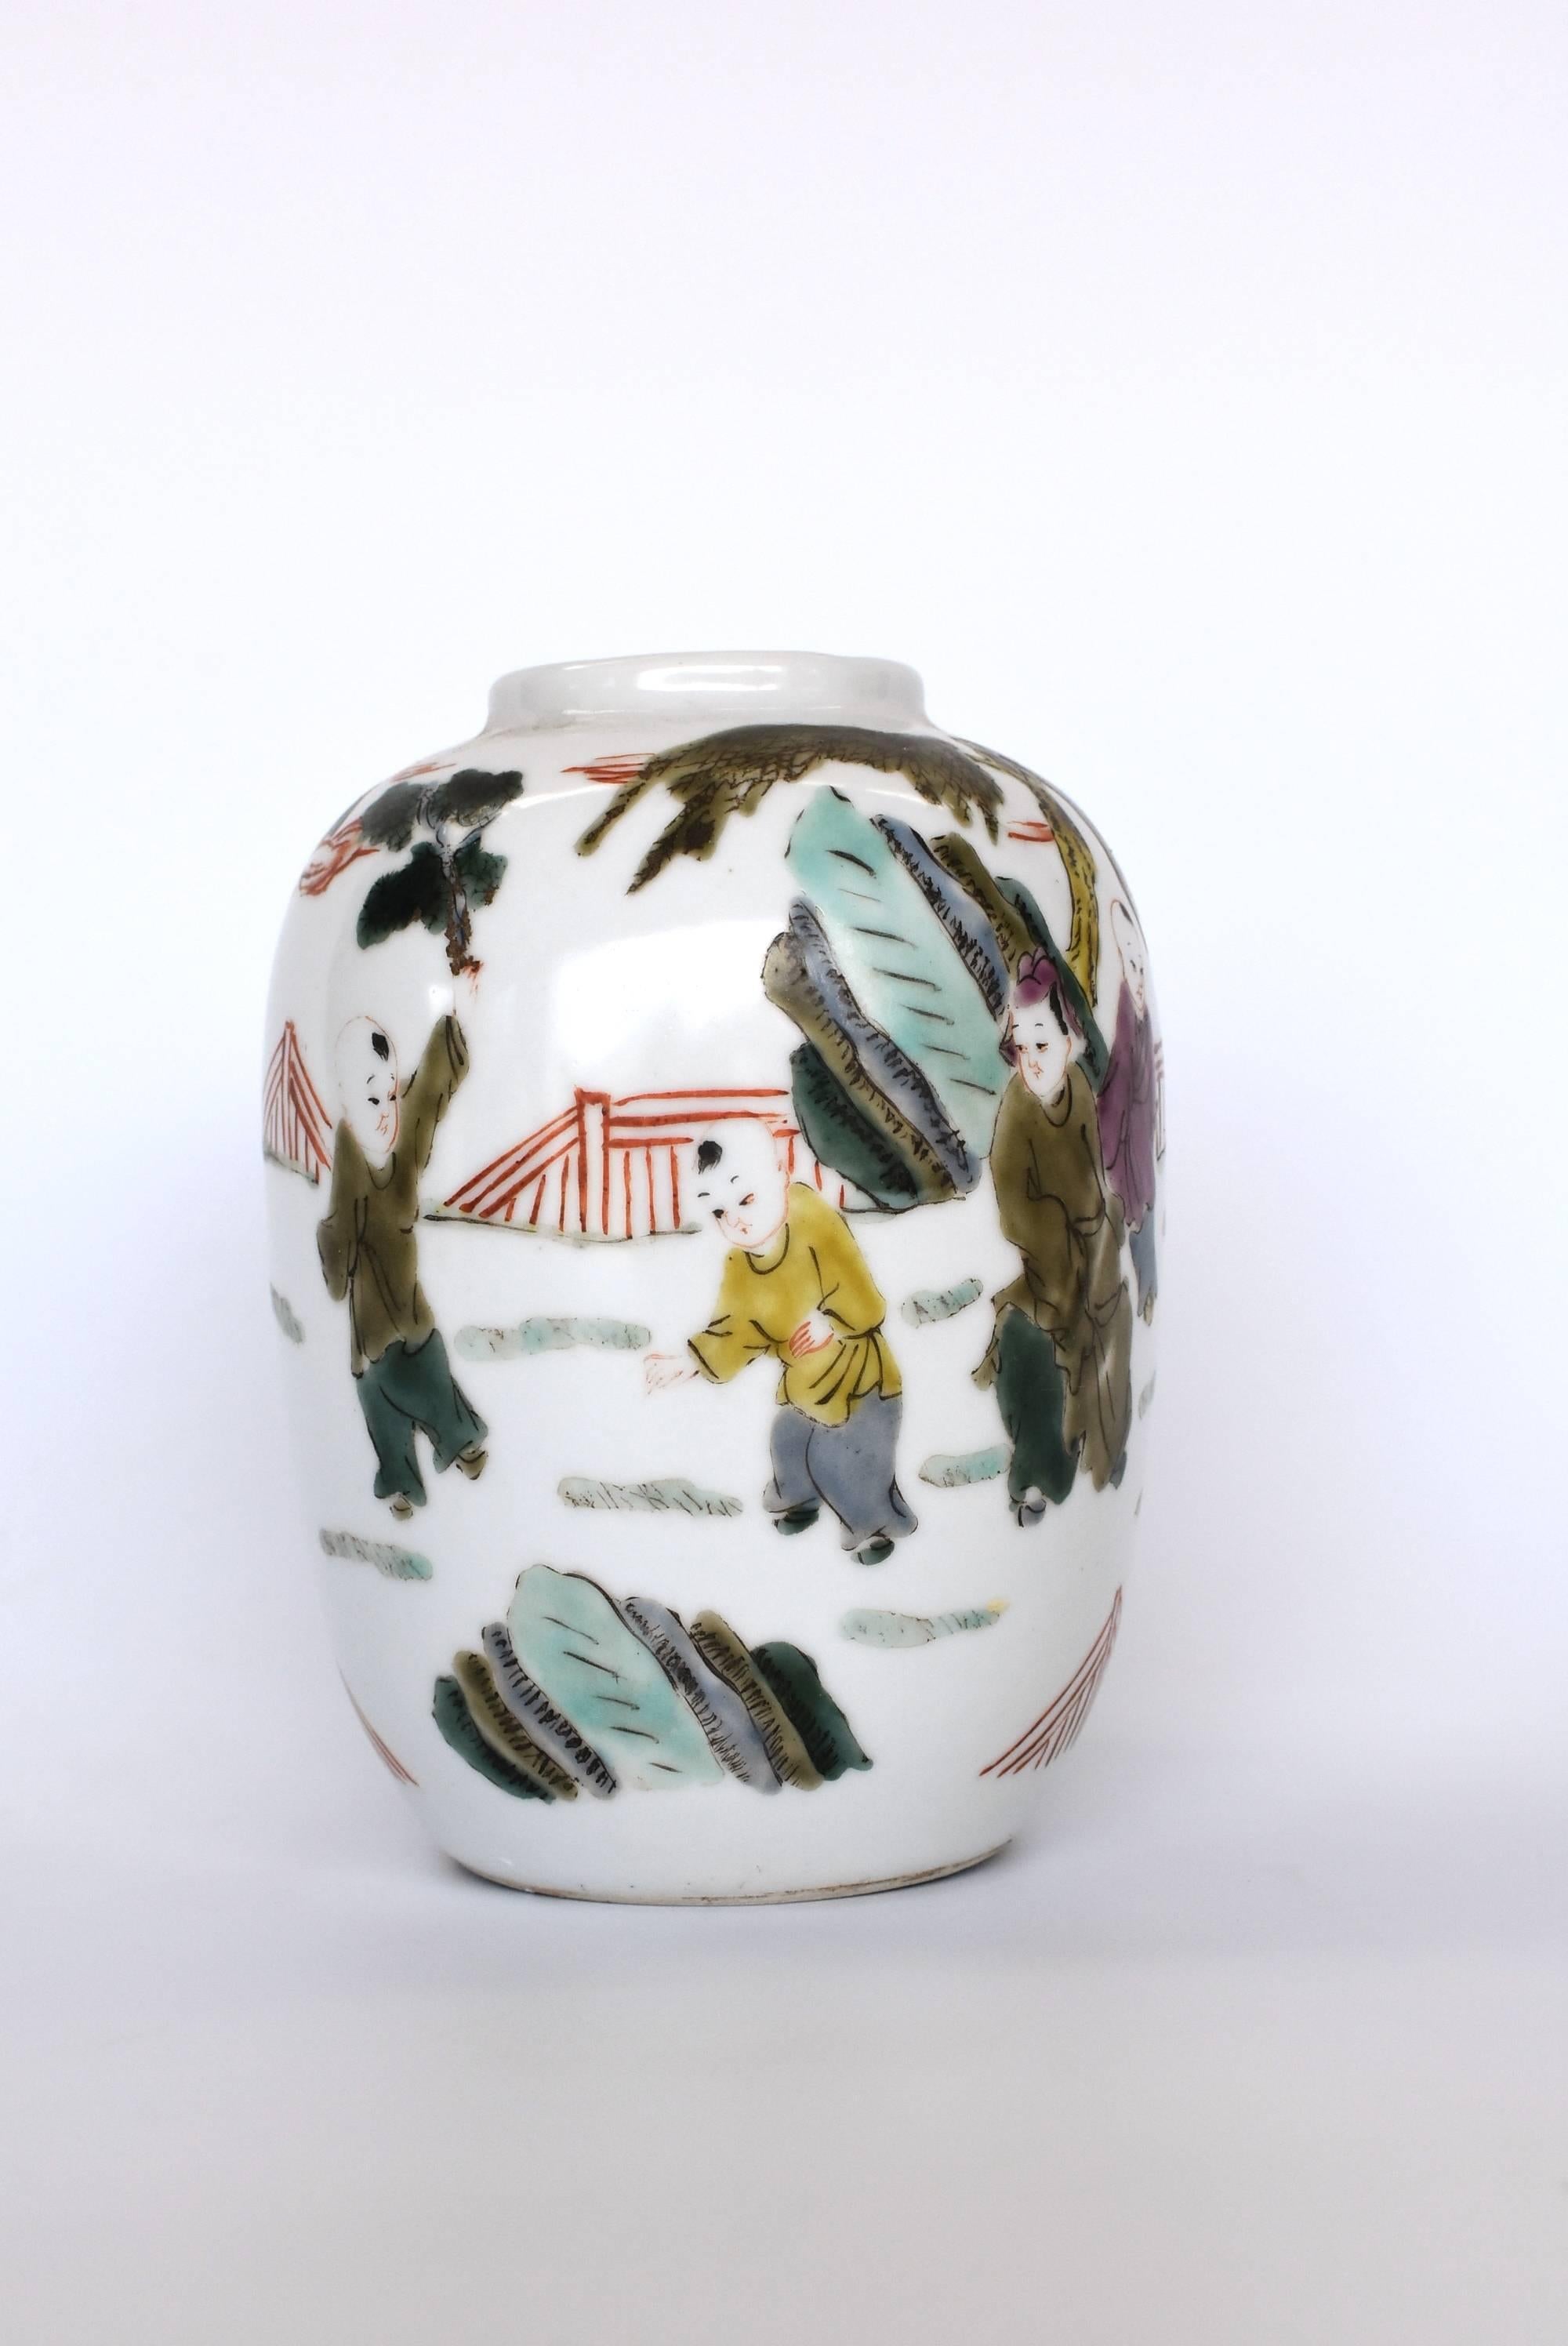 A highly collectible, hand painted Porcelain vase from the Chinese Republic Era. Typically featuring playful children and demure women, porcelain pieces from that period were painted with pastel colors on mainly white background. The use of muted